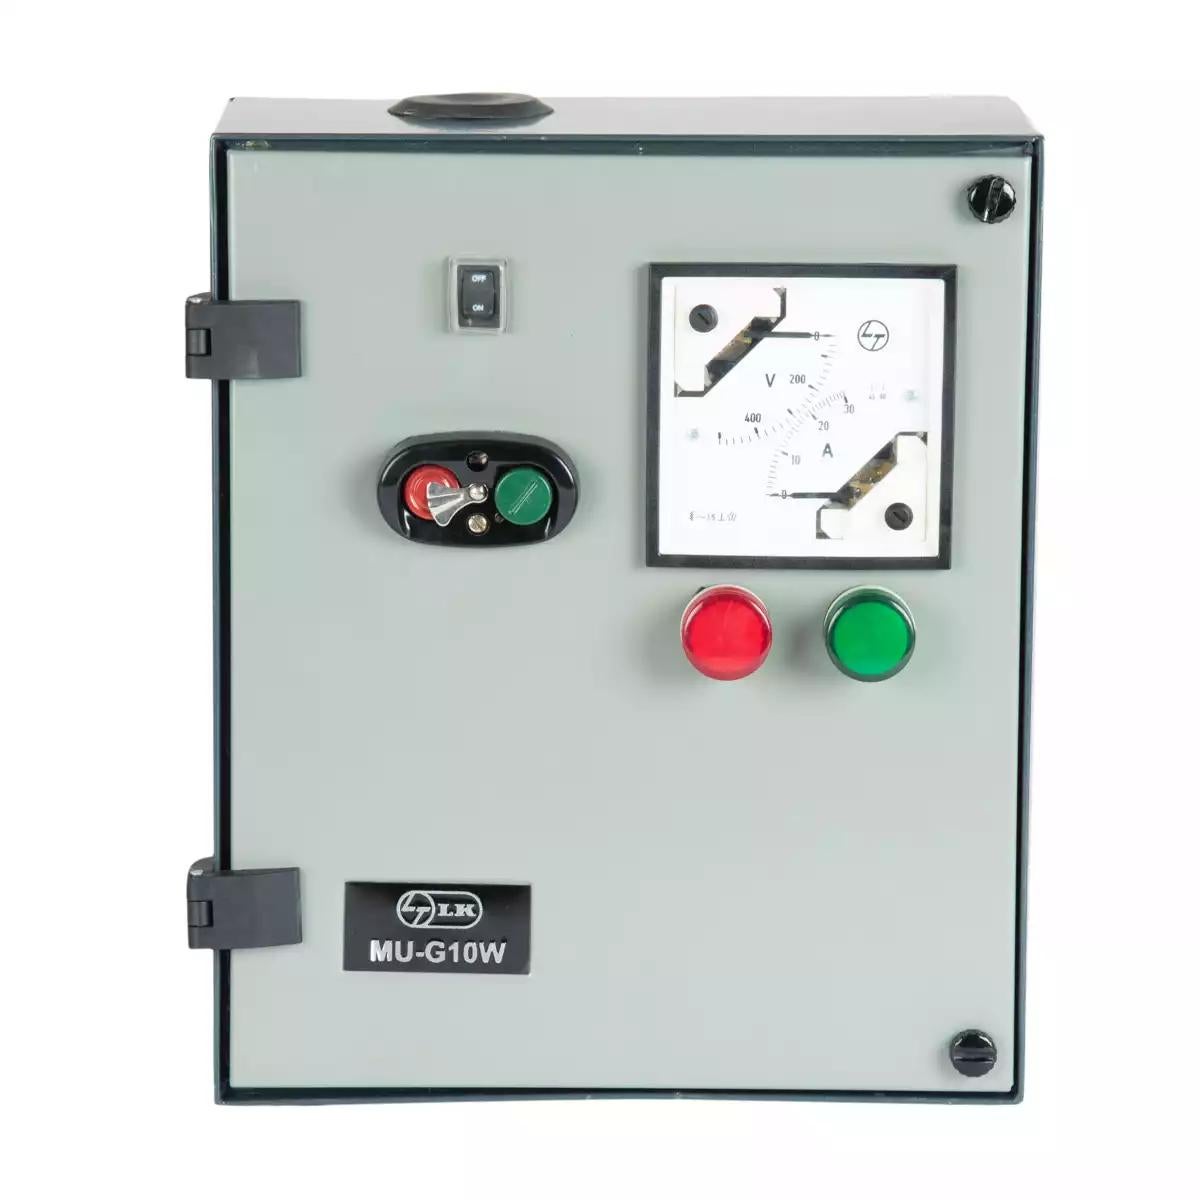 Three Phase DOL Controller with WLC for Submersible Pump Application,MU-G10W,5 HP,DOL